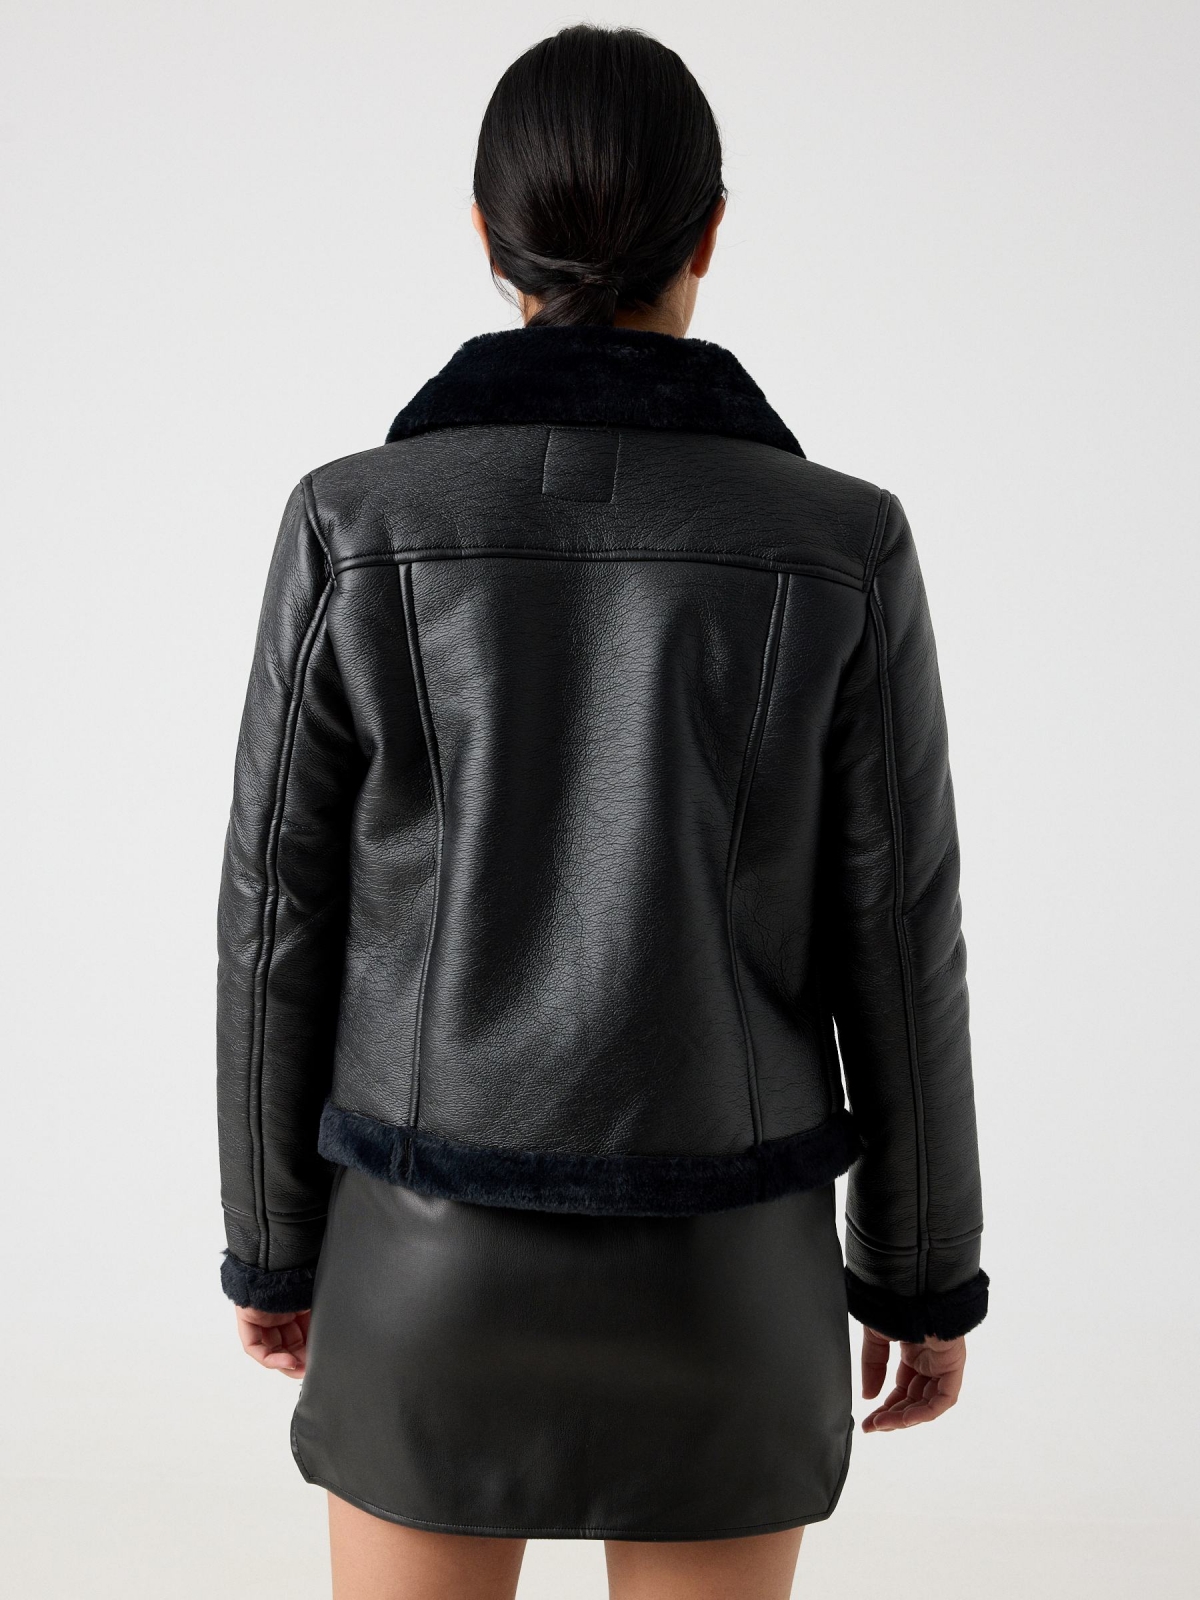 Leatherette jacket with fur black middle back view